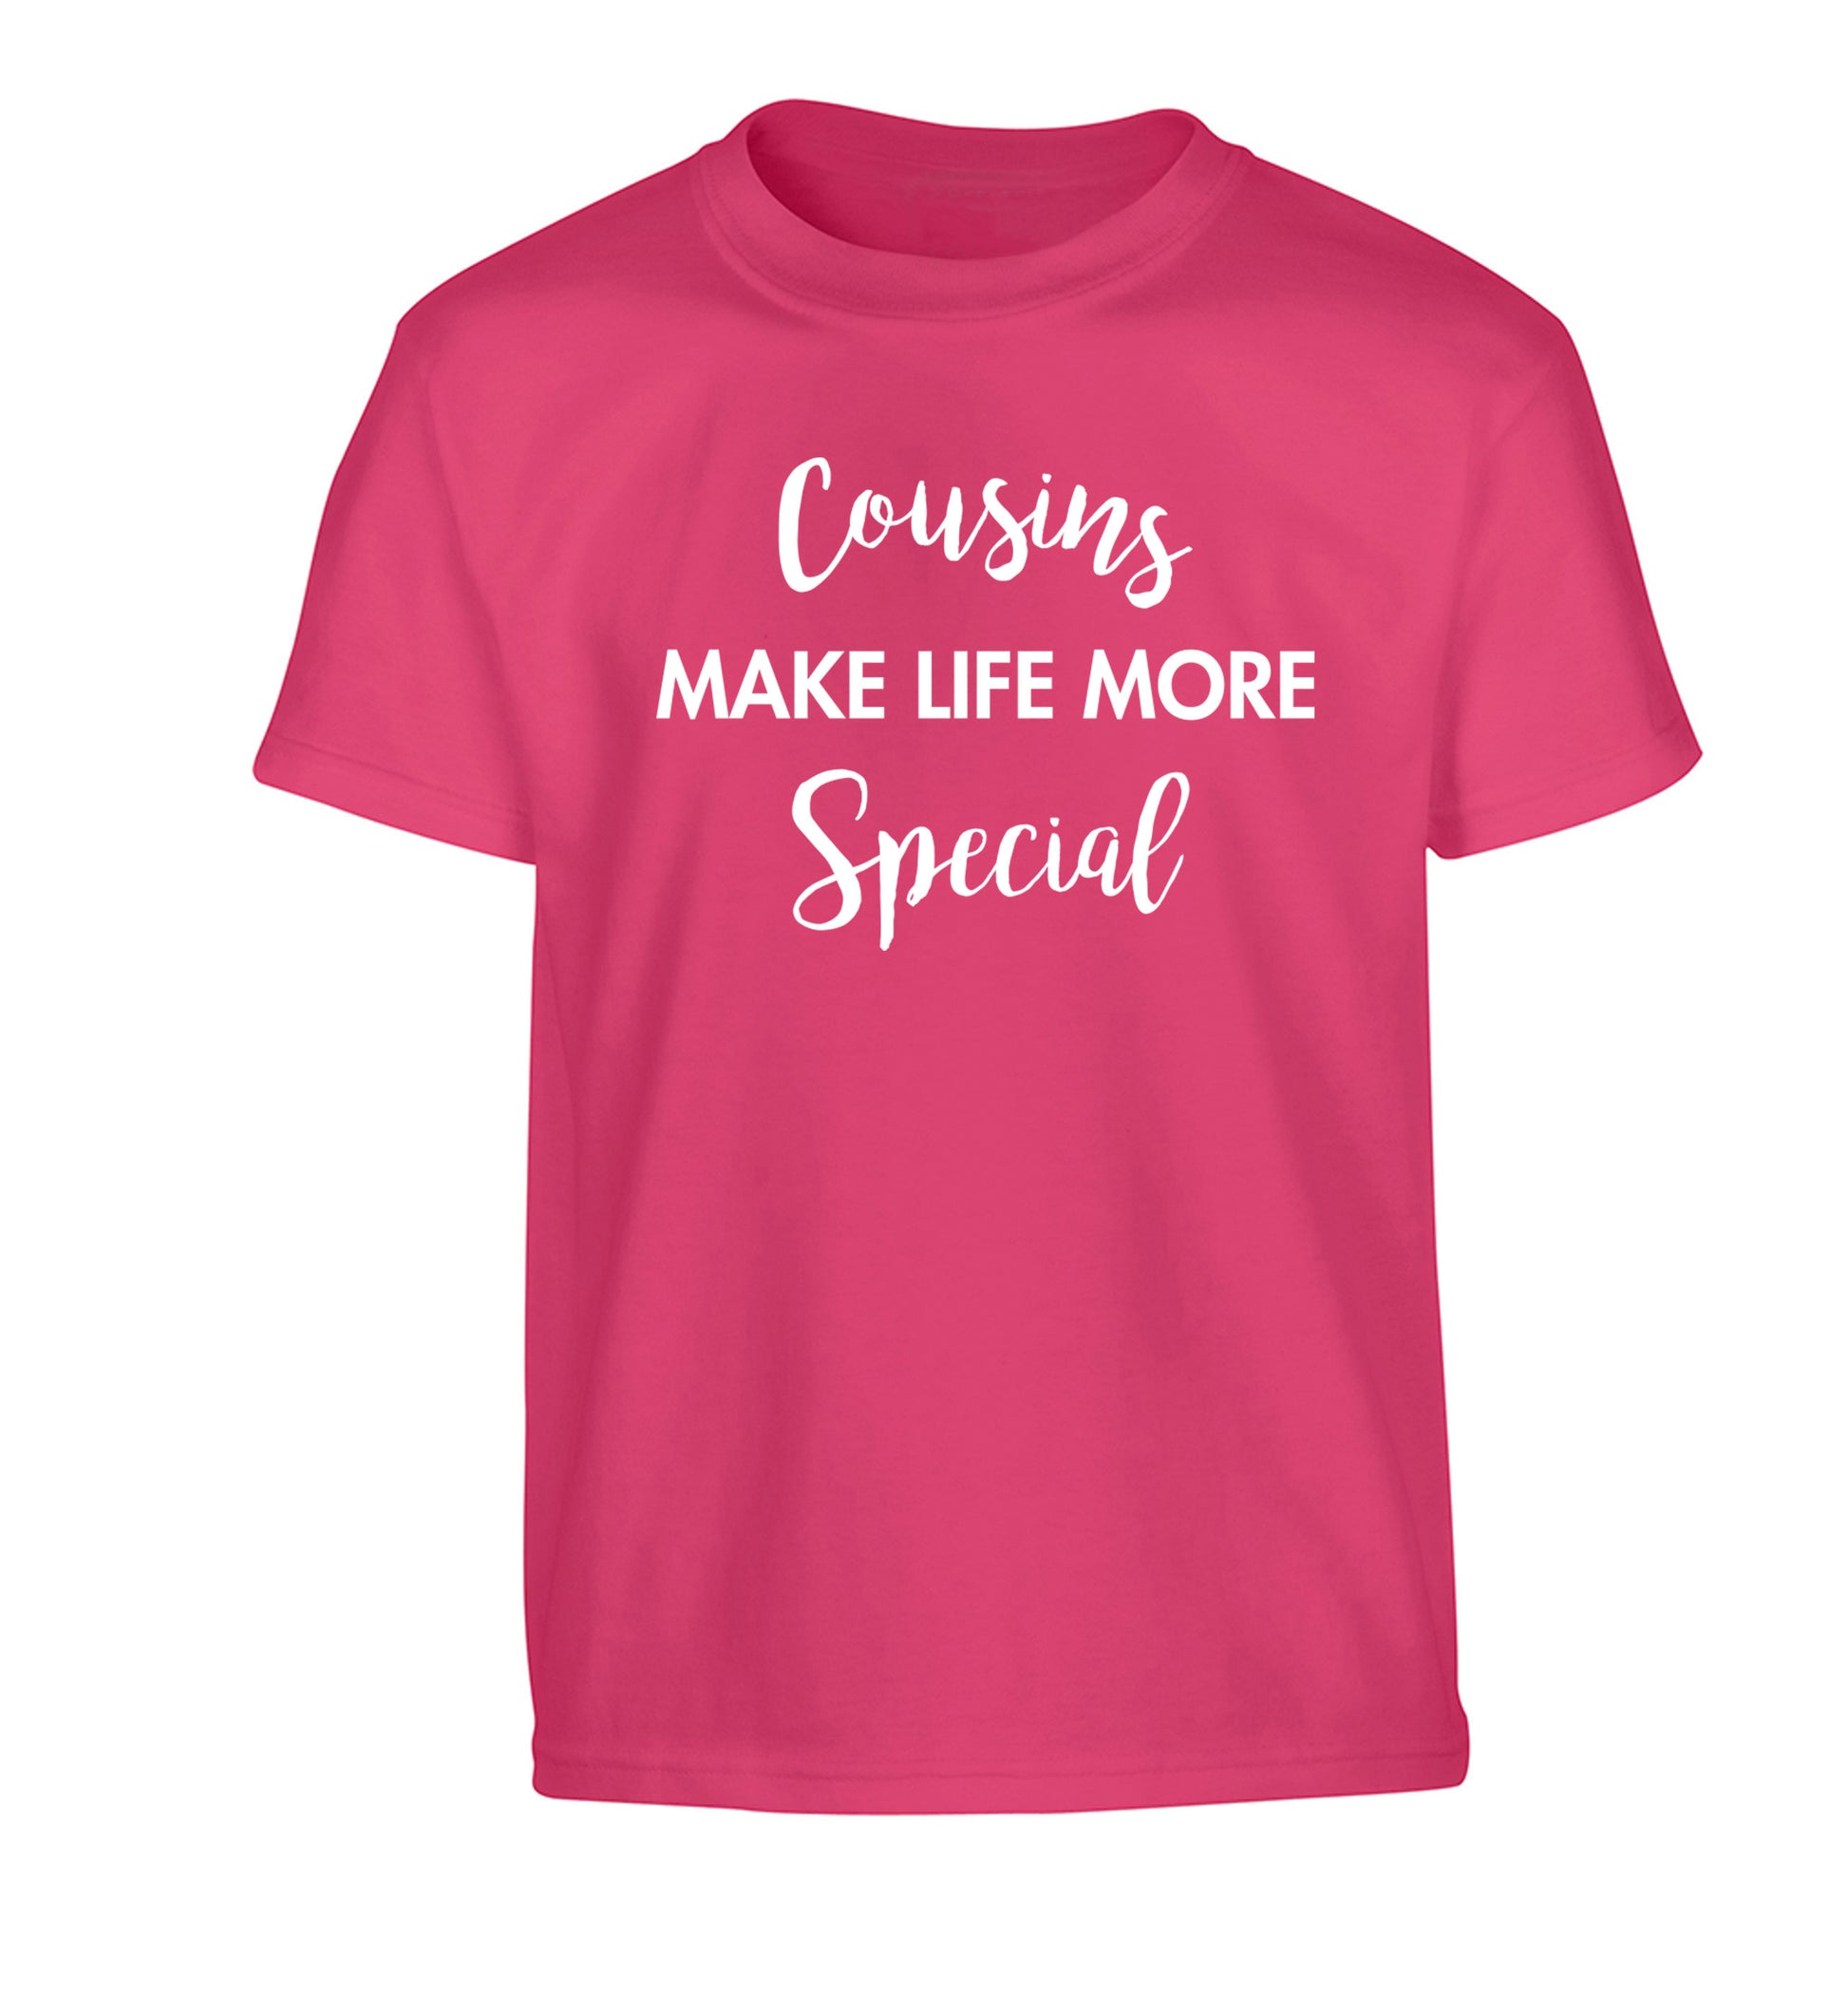 Cousins make life more special Children's pink Tshirt 12-14 Years